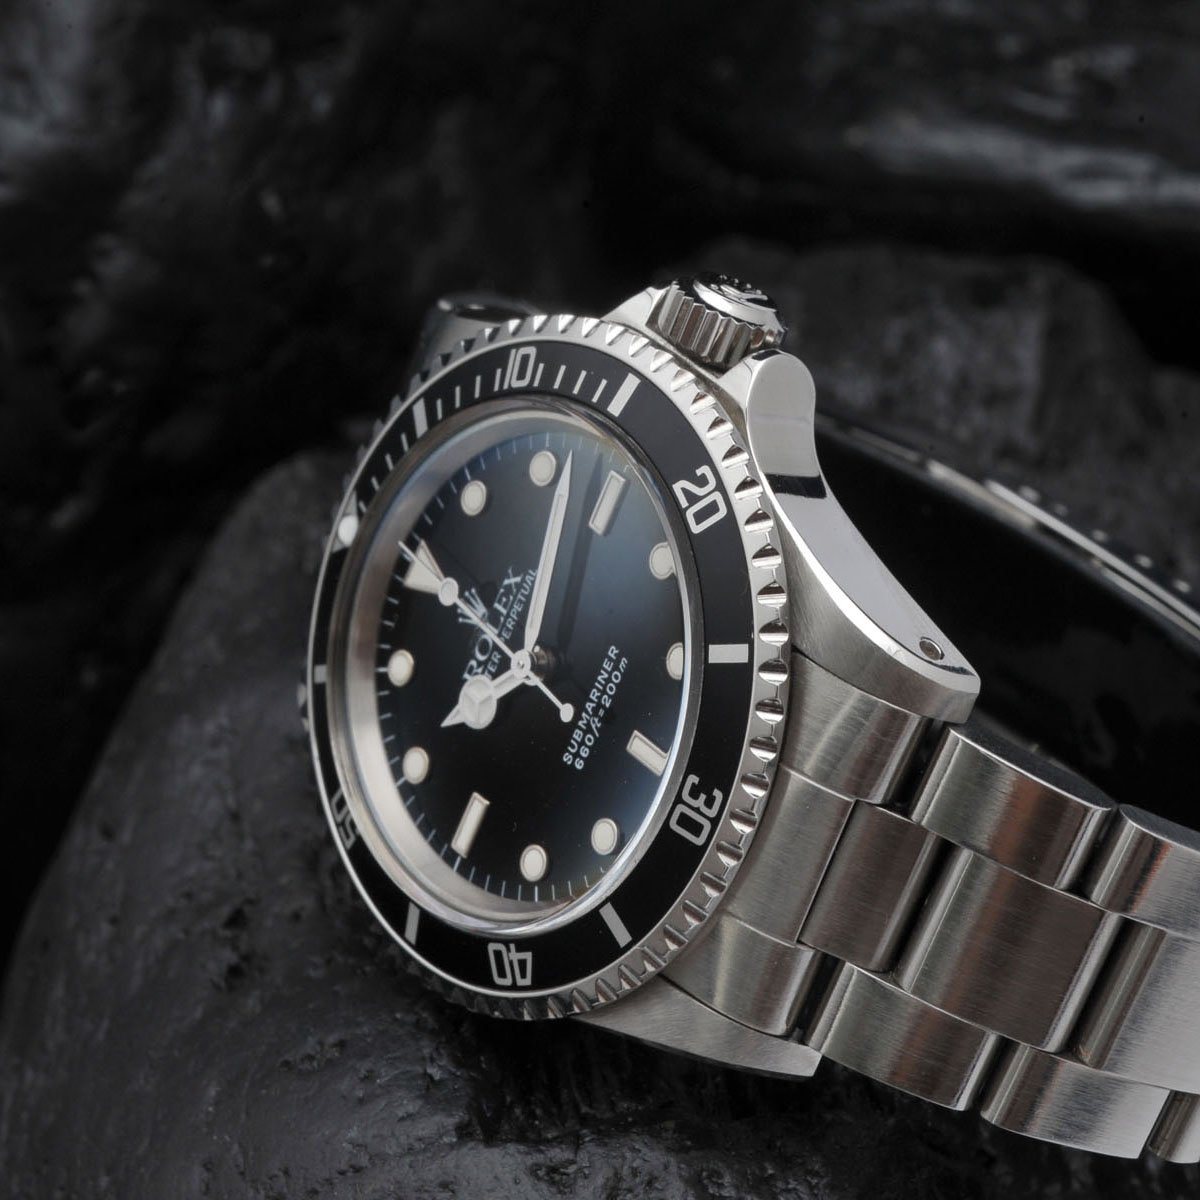 ROLEX 5513 SUBMARINER (WG) Timeless classic in a full package